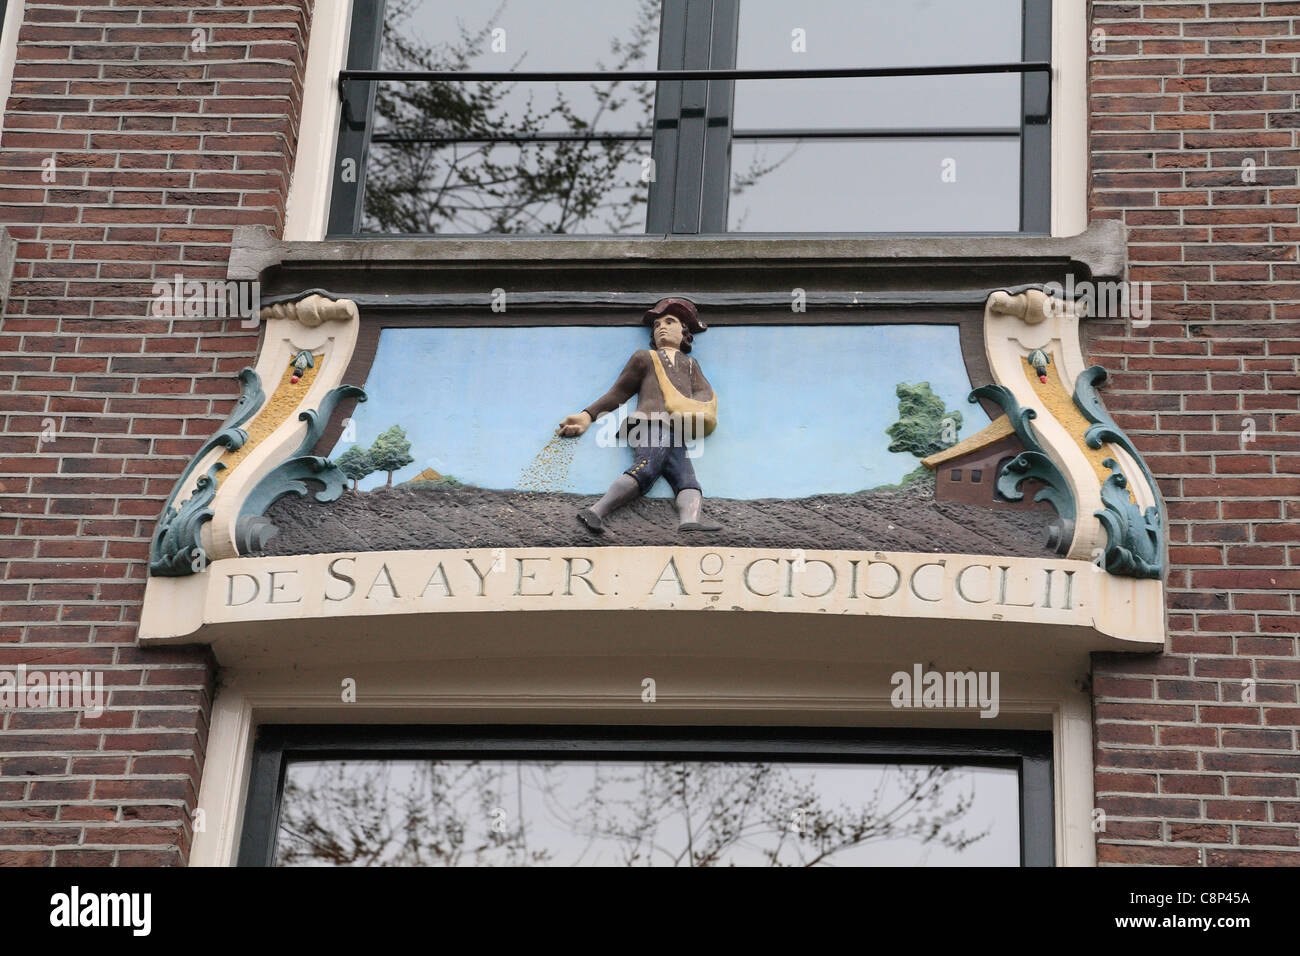 House sign in Jordaan Relief ornate depicting a man sowing seed on ploughed field De Saayer sower Amsterdam Holland Netherlands Stock Photo